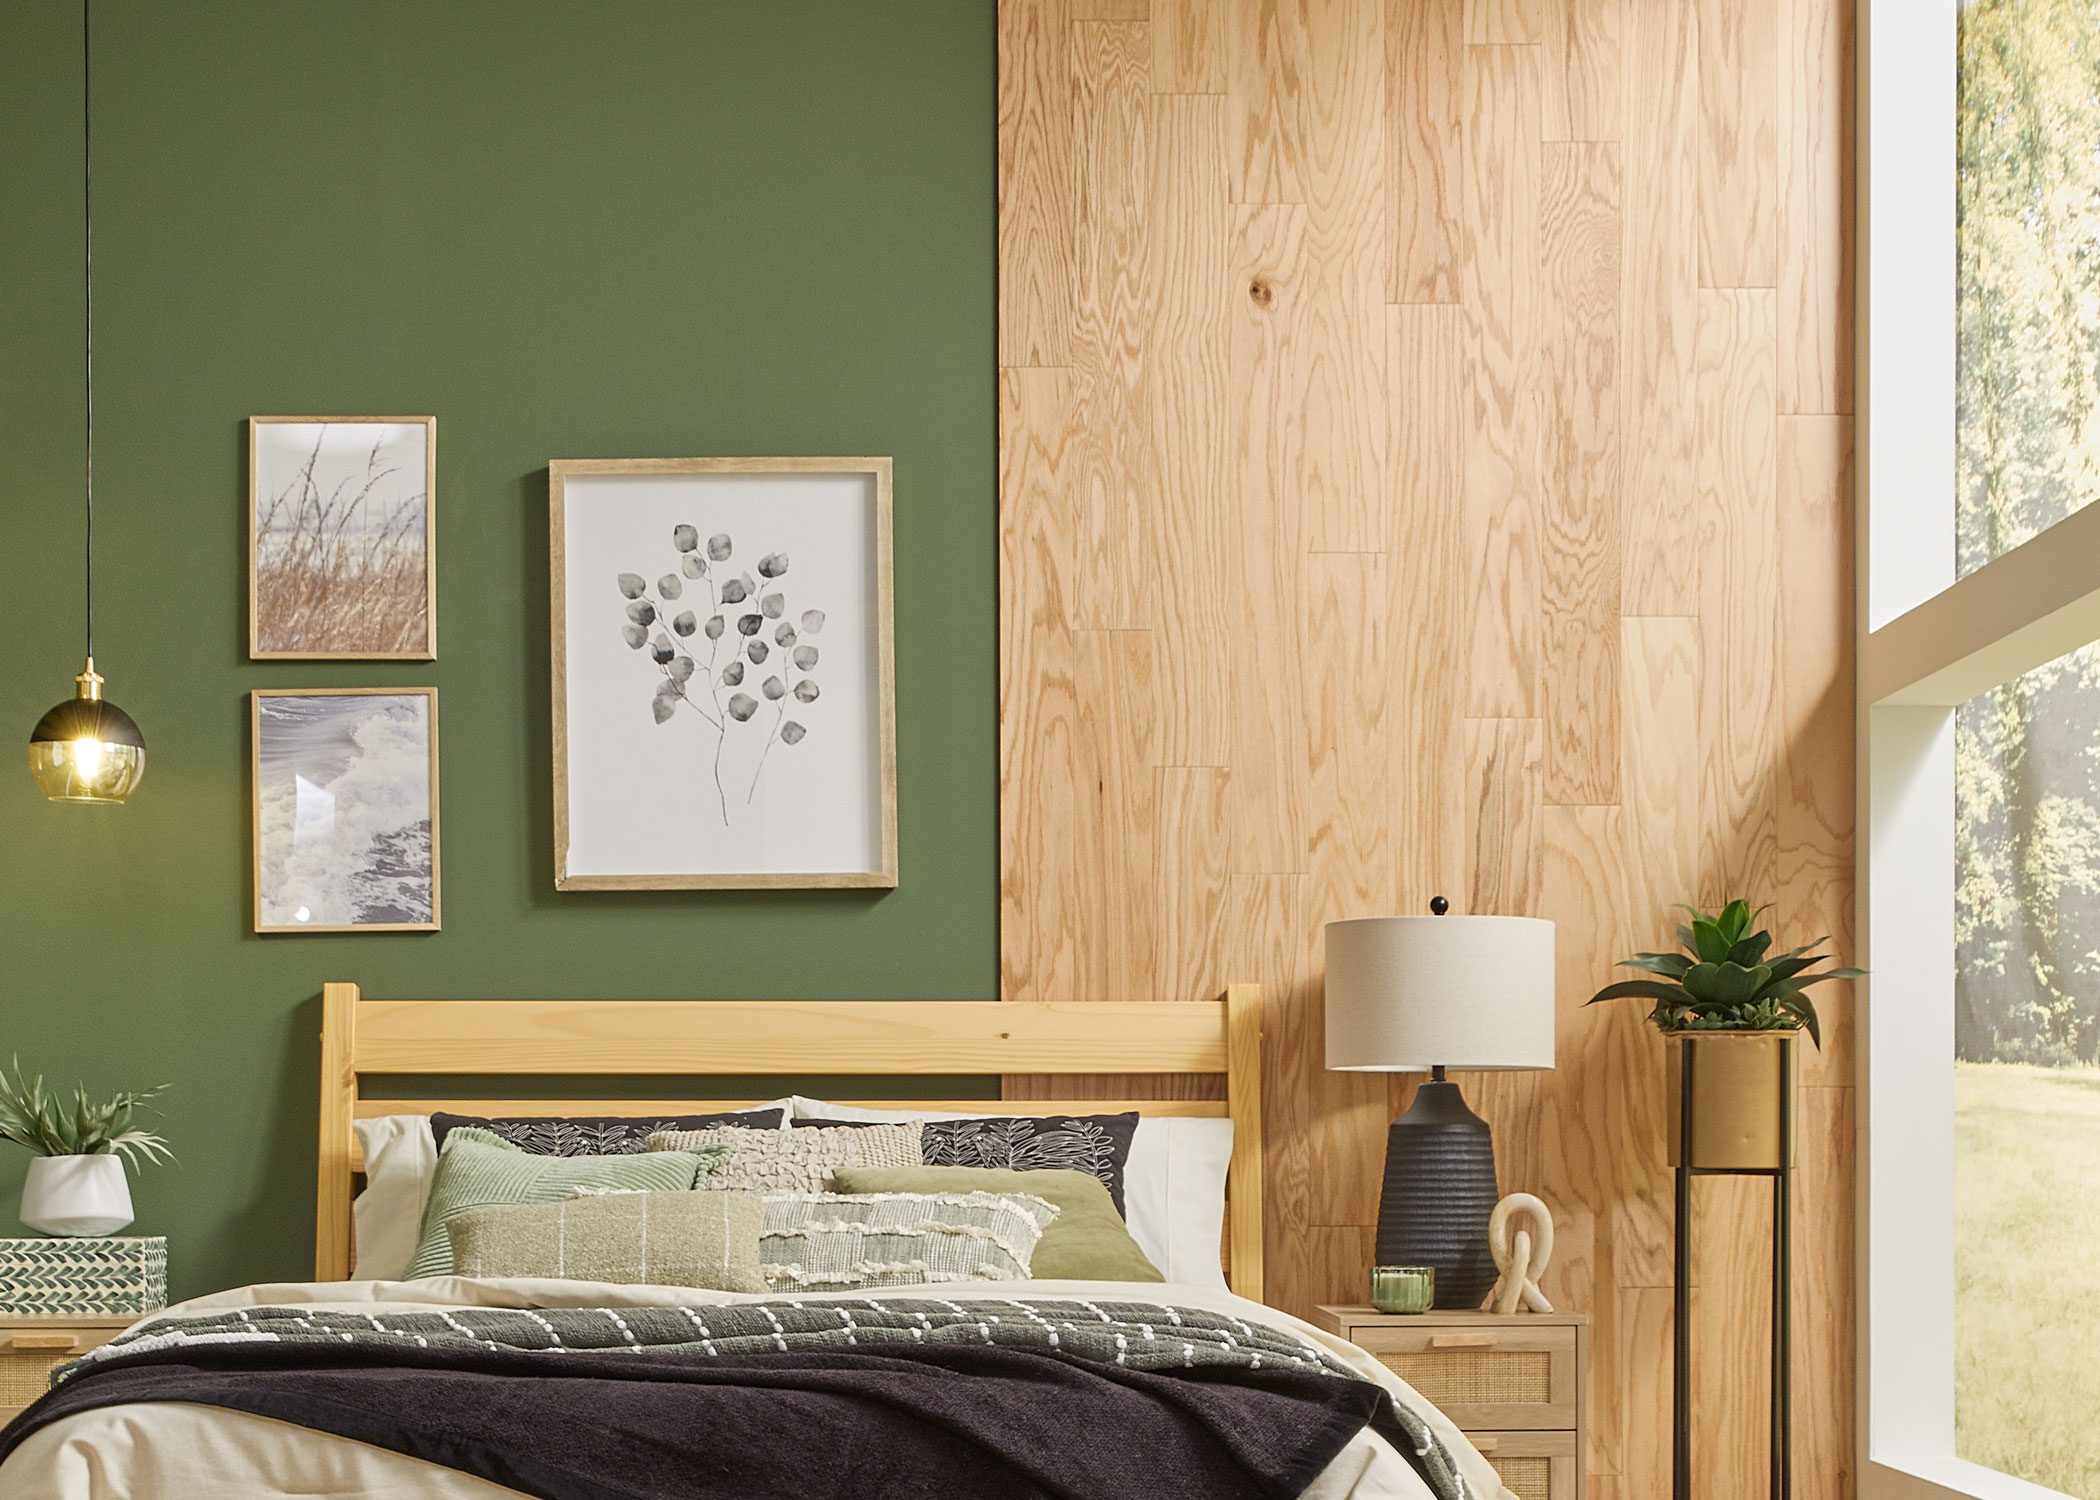 red oak solid hardwood floor installed as accent wall in bedroom with green accent wall and blonde wood furnishings